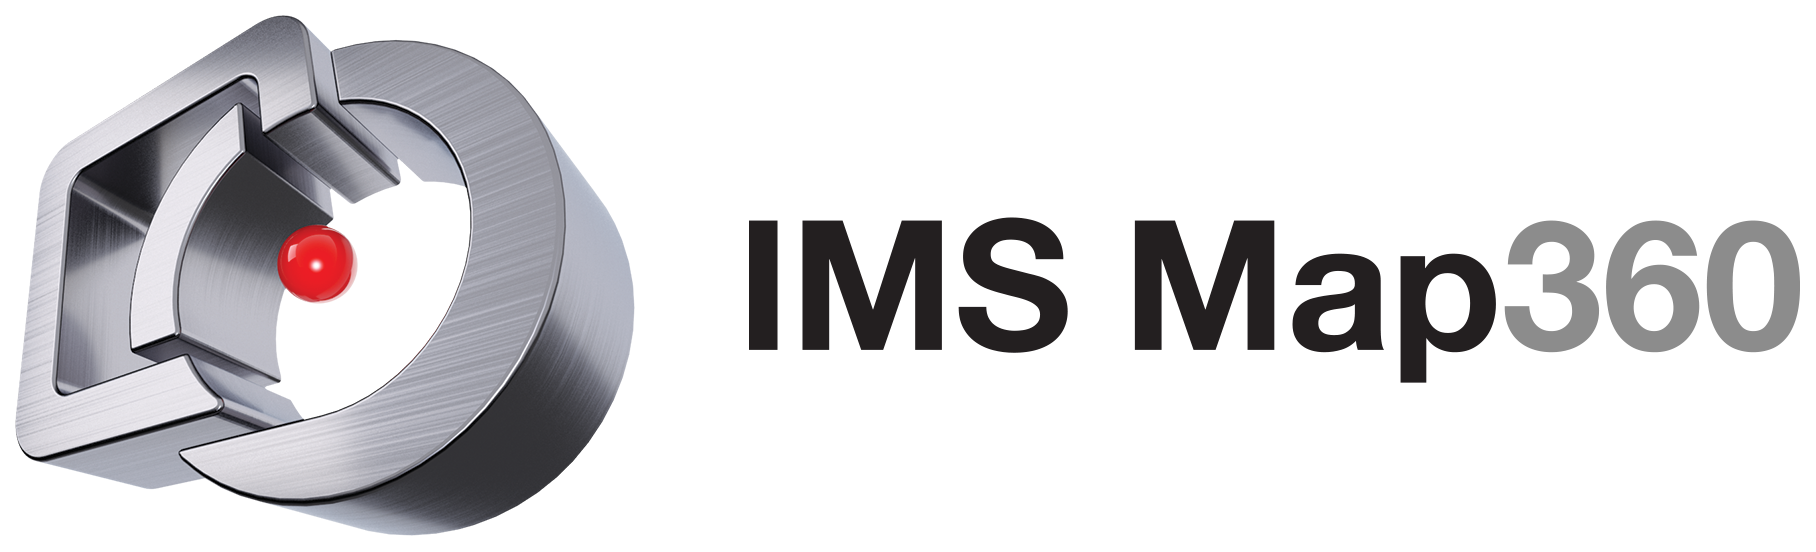 IMS Map360 analytic and imaging software logo